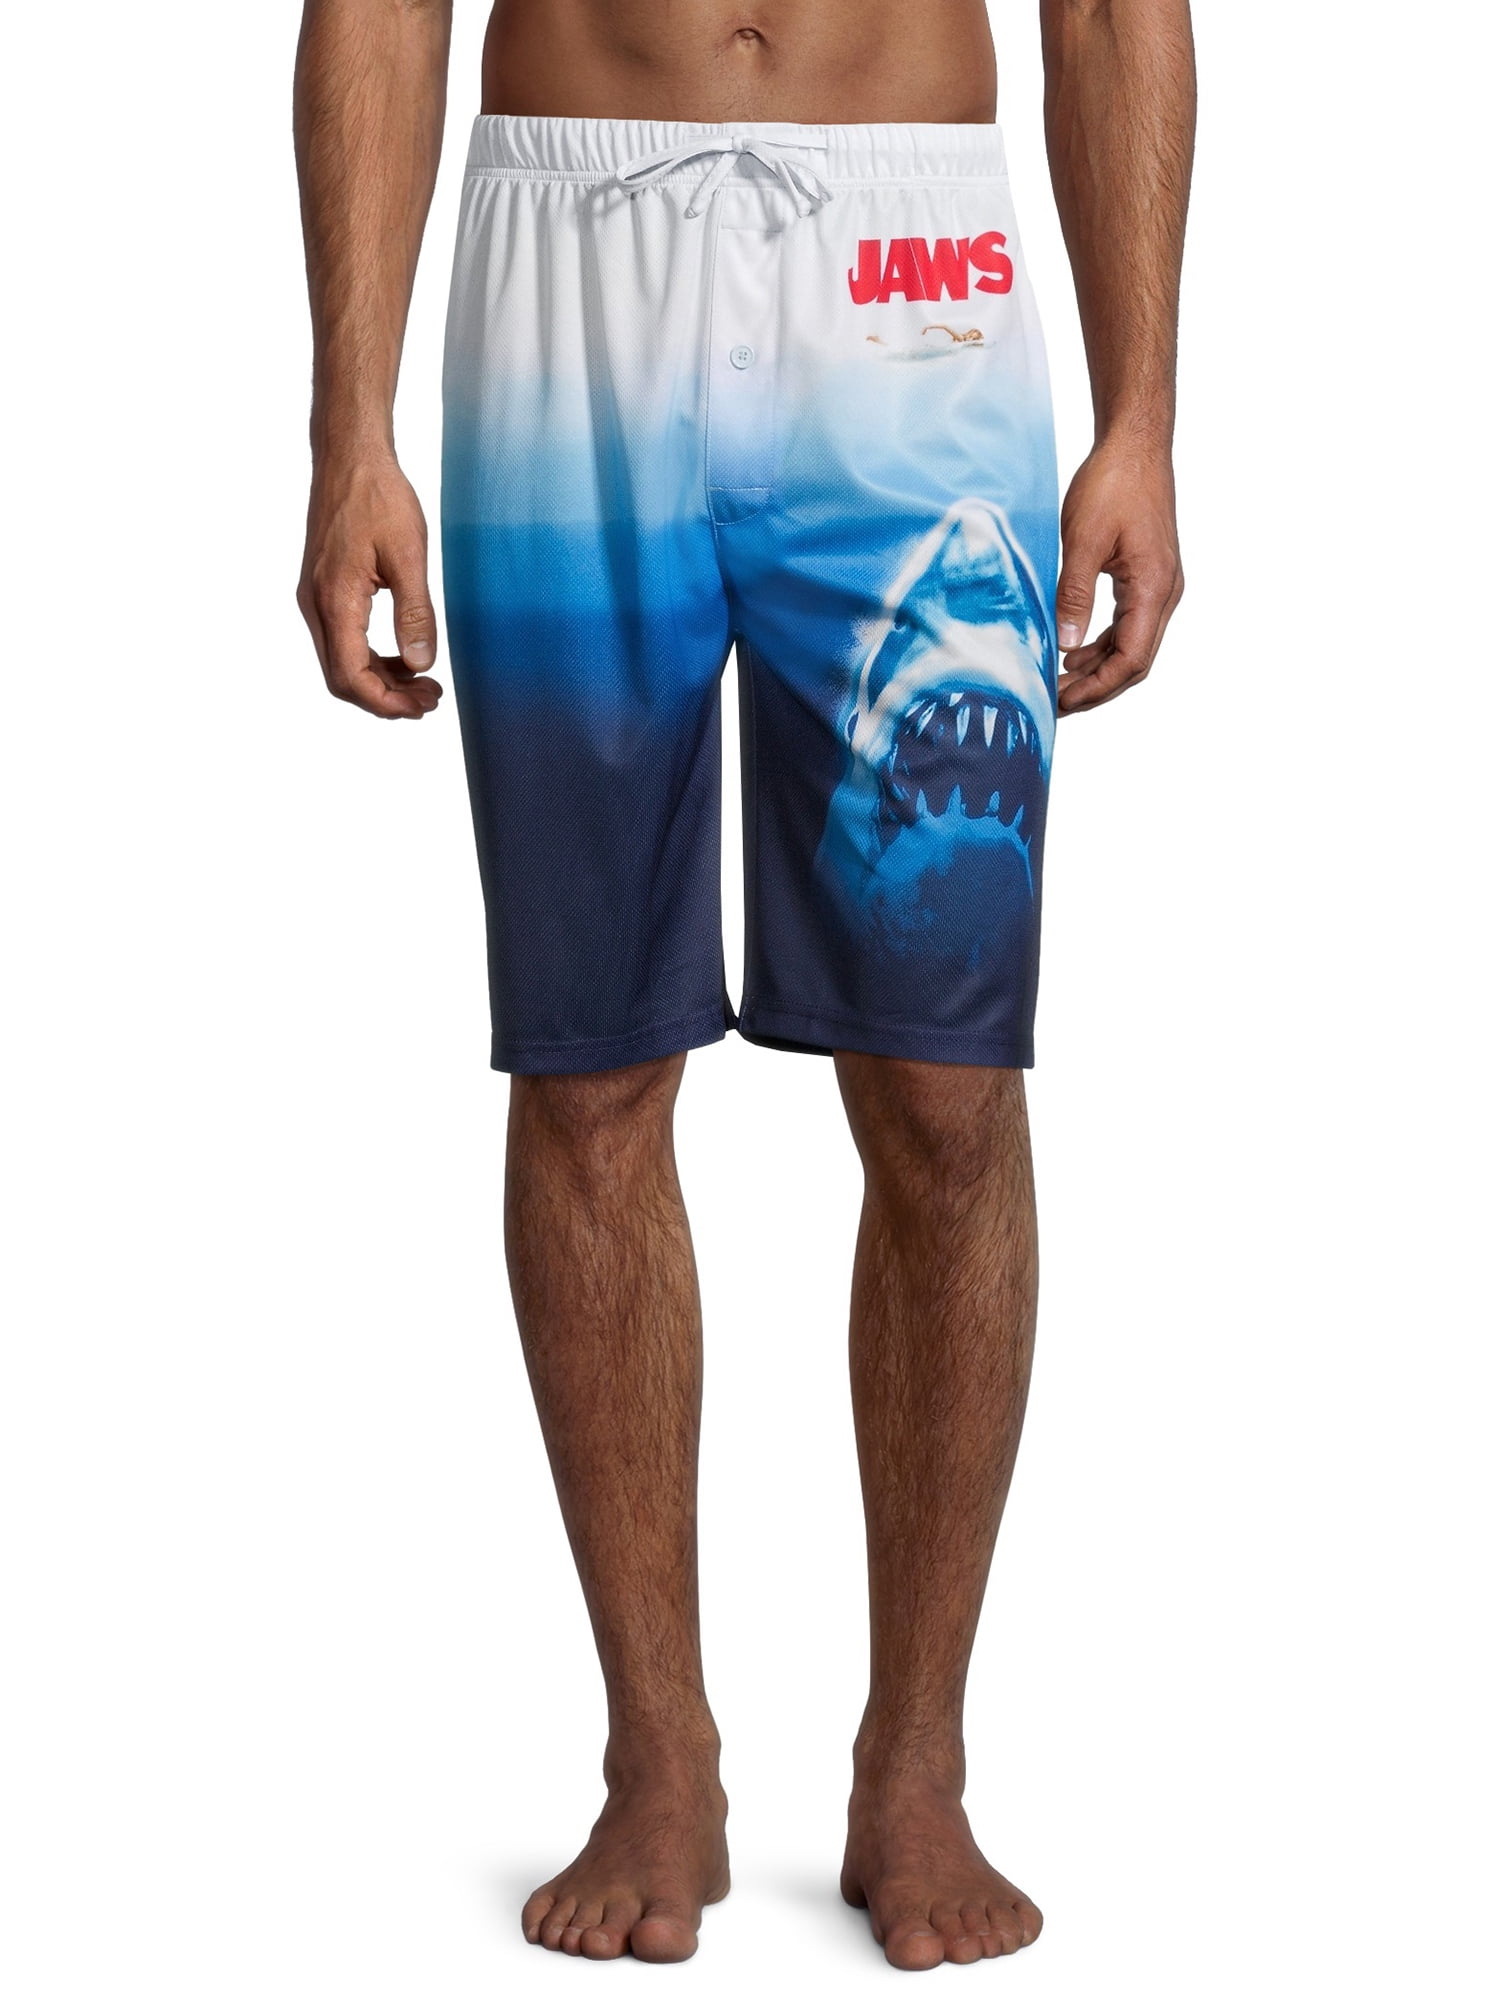 Jaws Mens Summer Board Shorts Swim Trunks Swimsuit Or Athletic Shorts with Pockets